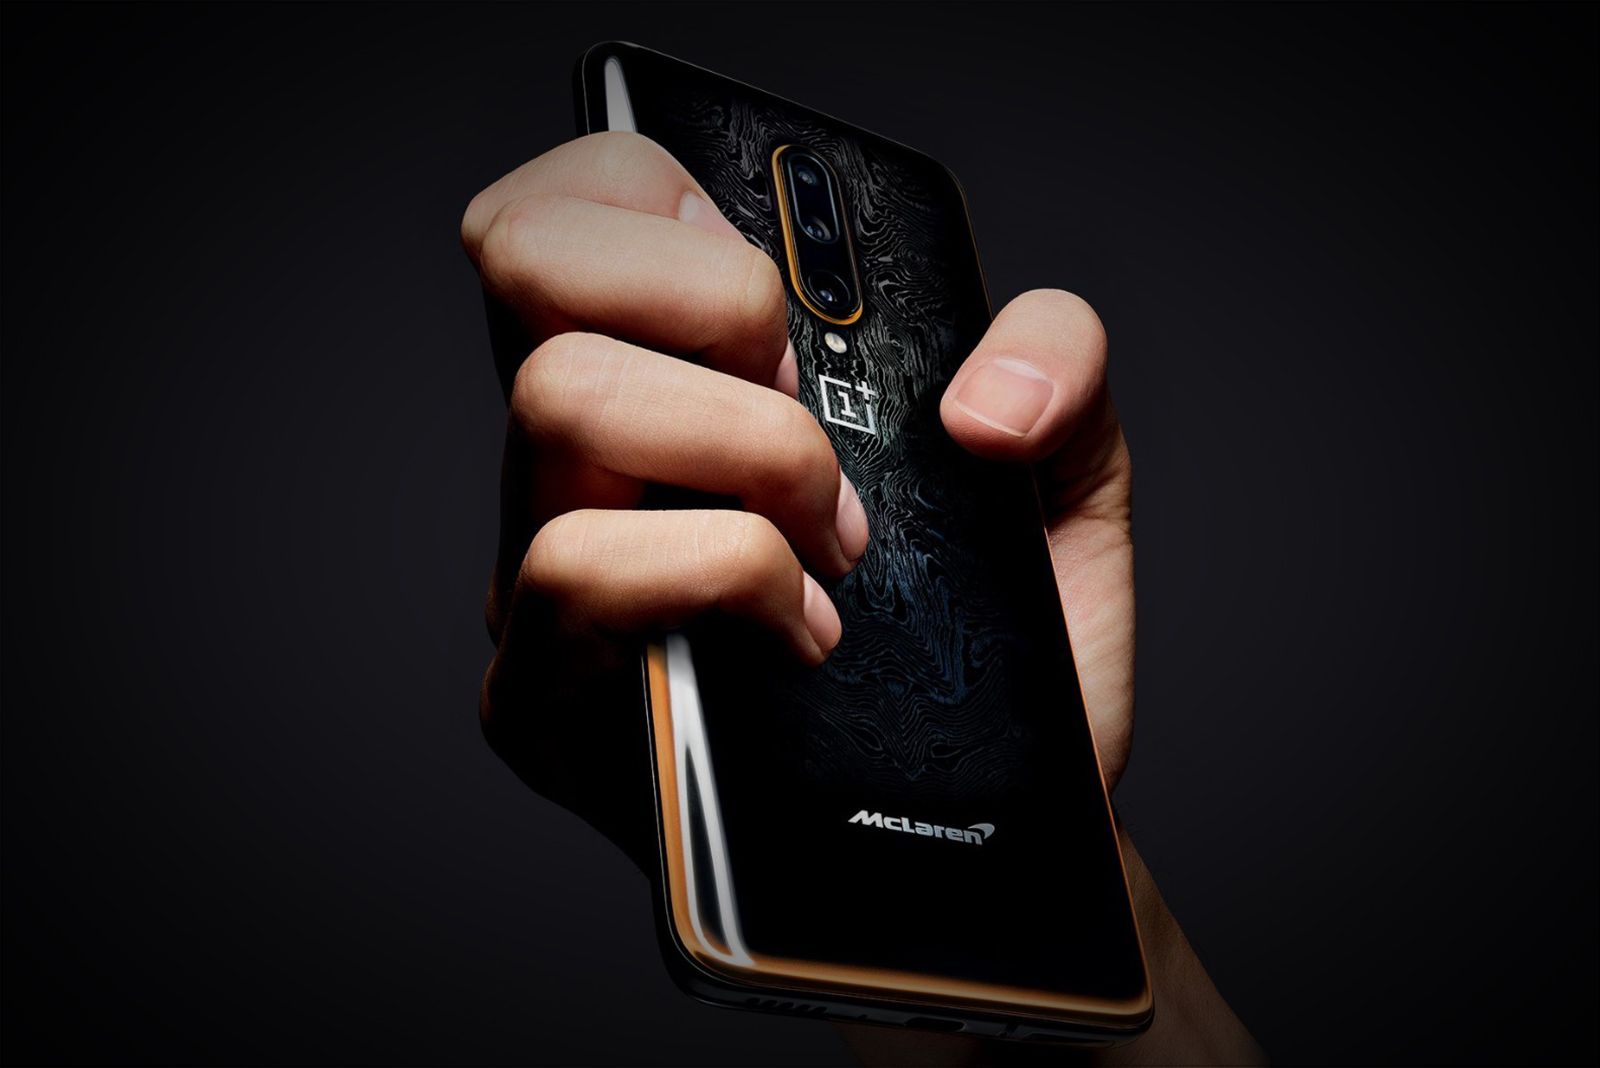 Oneplus Gives The New Oneplus 7t Pro The Mclaren Treatment image 1